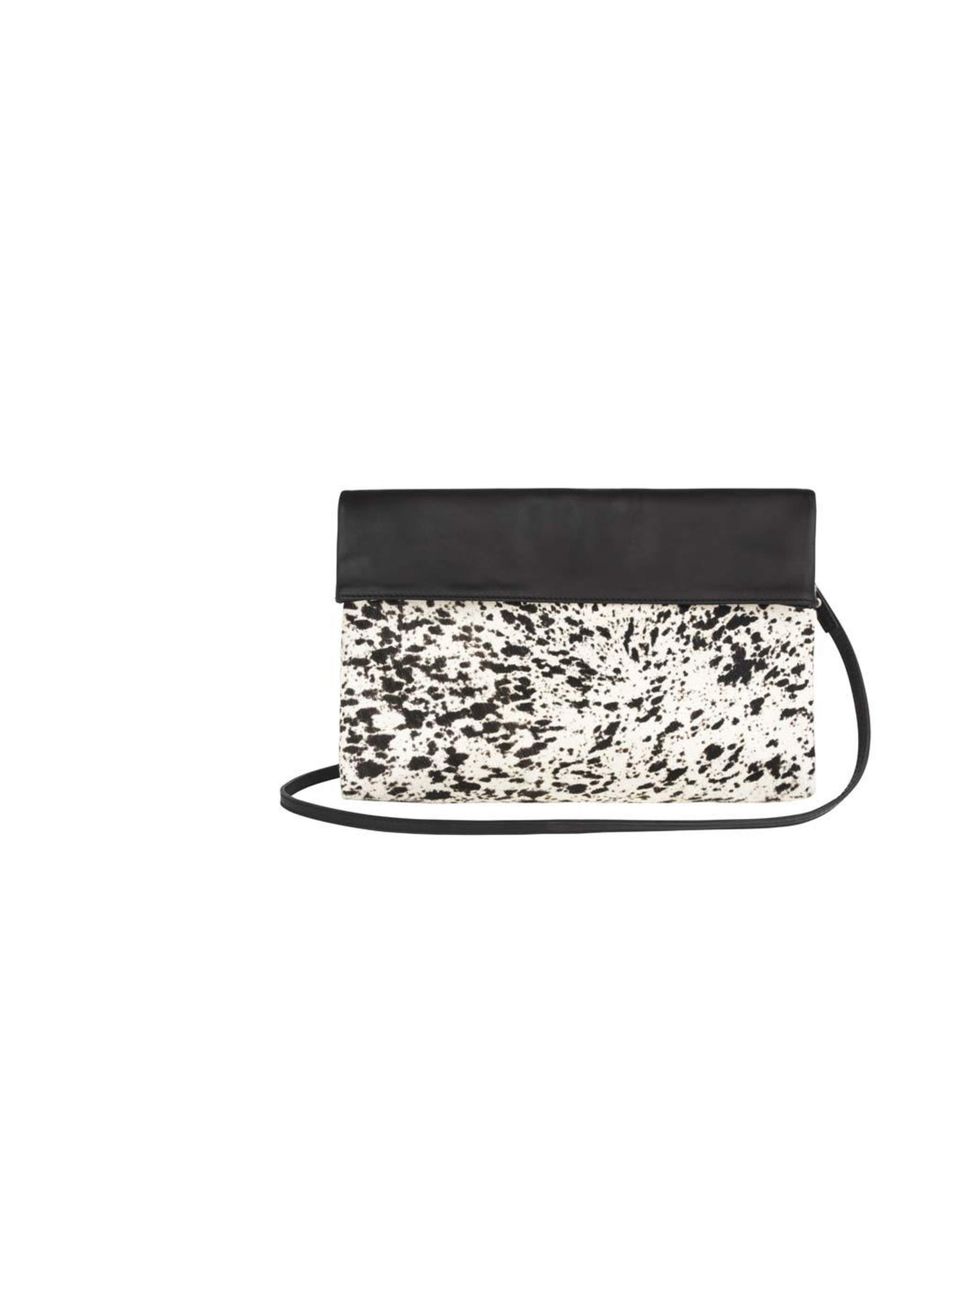 <p>Chief Sub Editor Fern Ross has her eye on this monochrome animal print clutch - the perfect way to introduce print into any outfit.</p><p><a href="http://www.marksandspencer.com/Autograph-Leather-Slouch-Clutch-Bag/dp/B002F6PTMQ?ie=UTF8&amp;ref=sr_1_31&